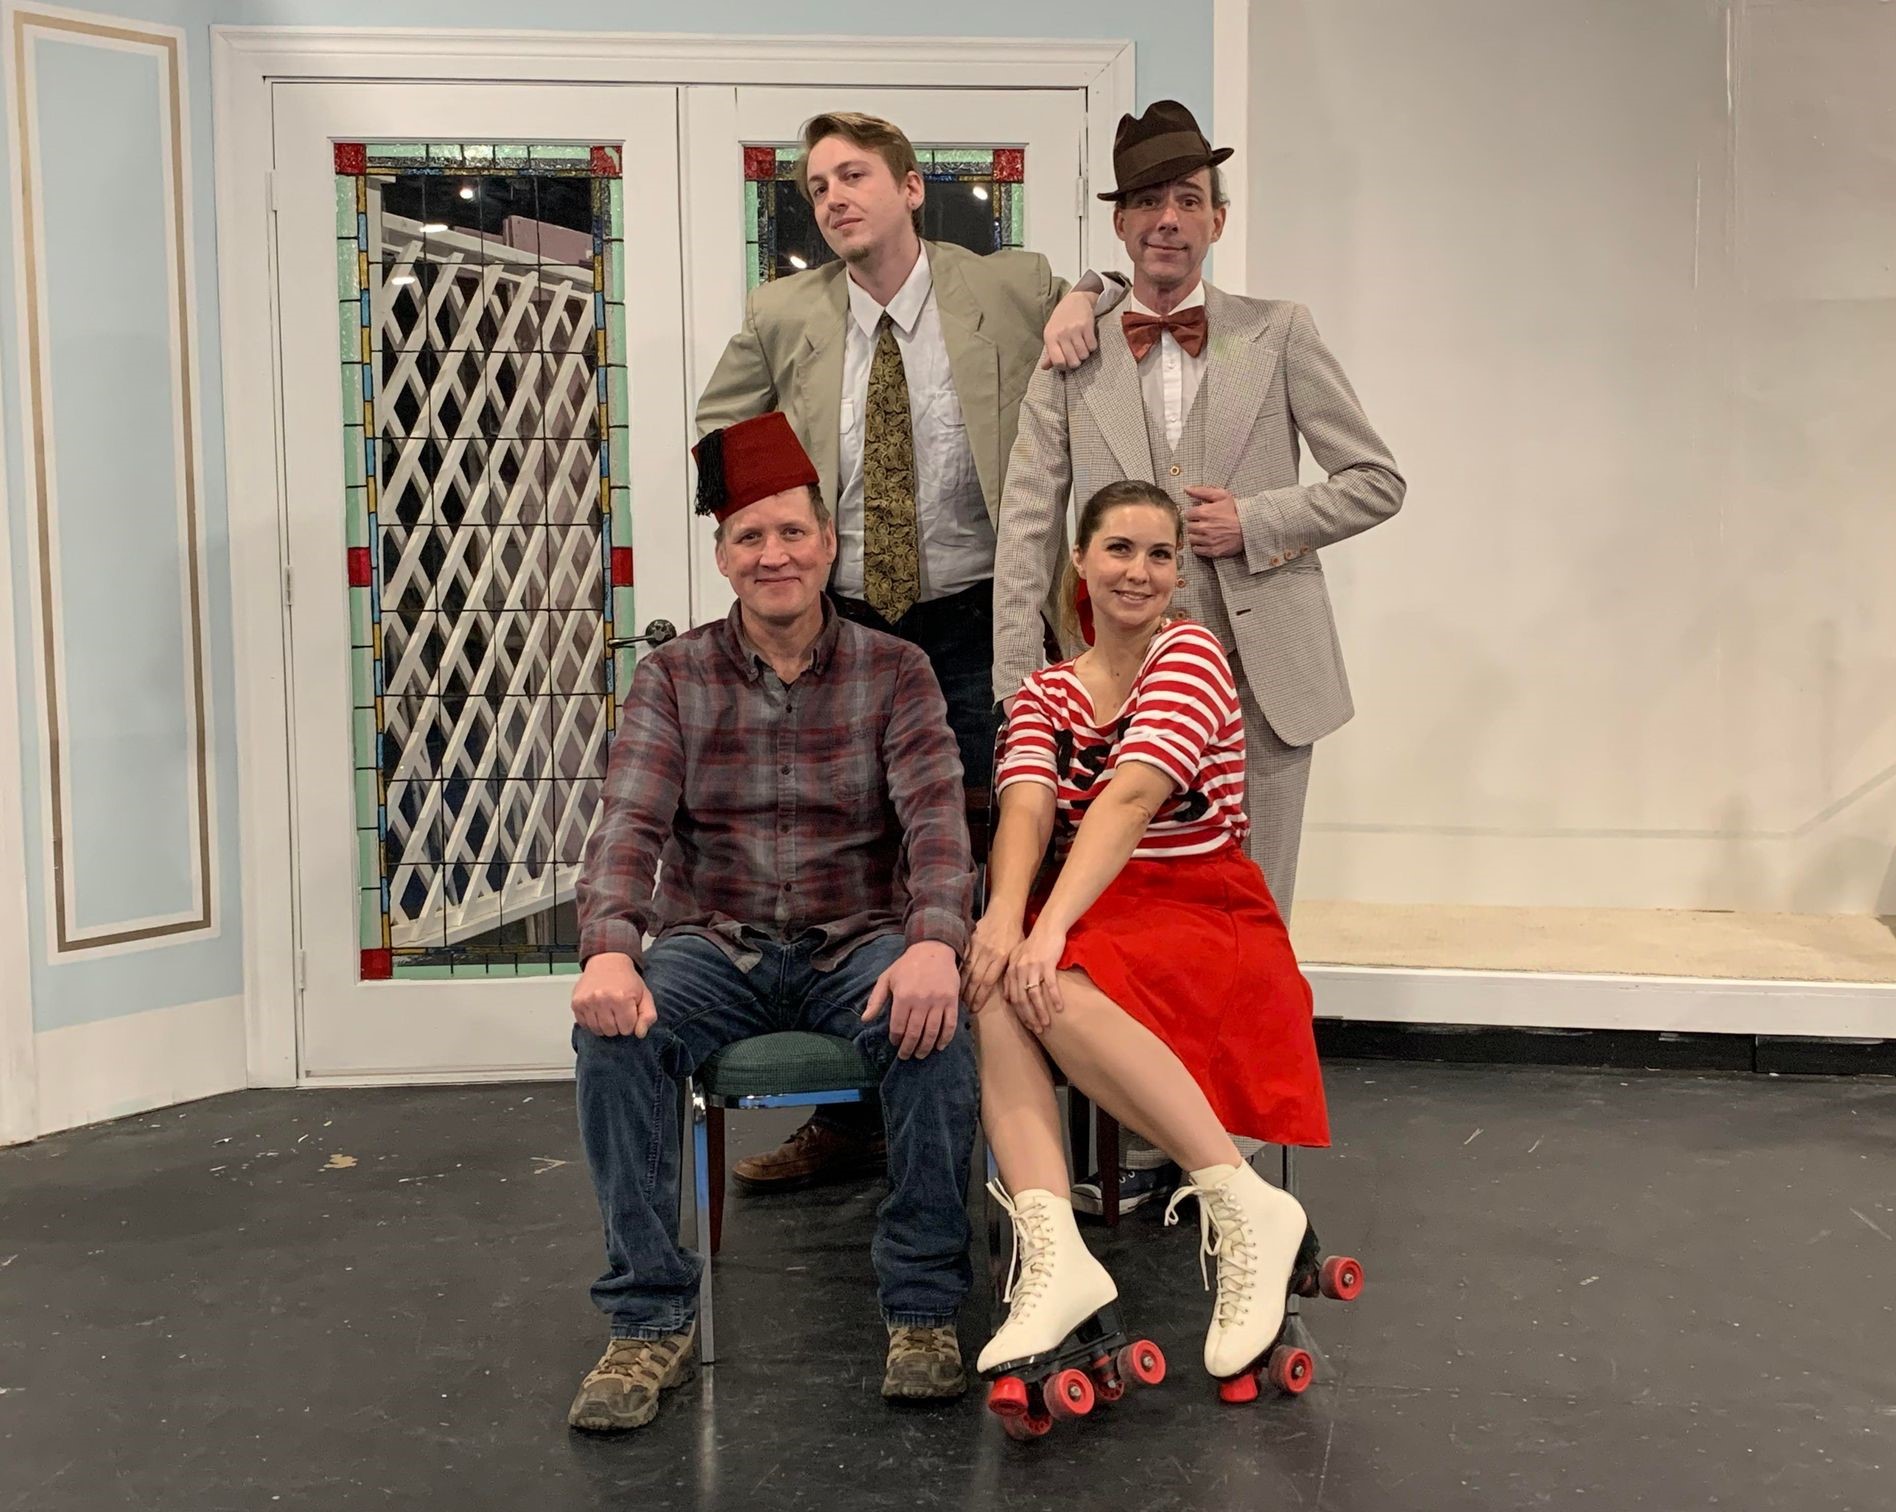 Opening Night - SEAWAY VALLEY THEATRE COMPANY